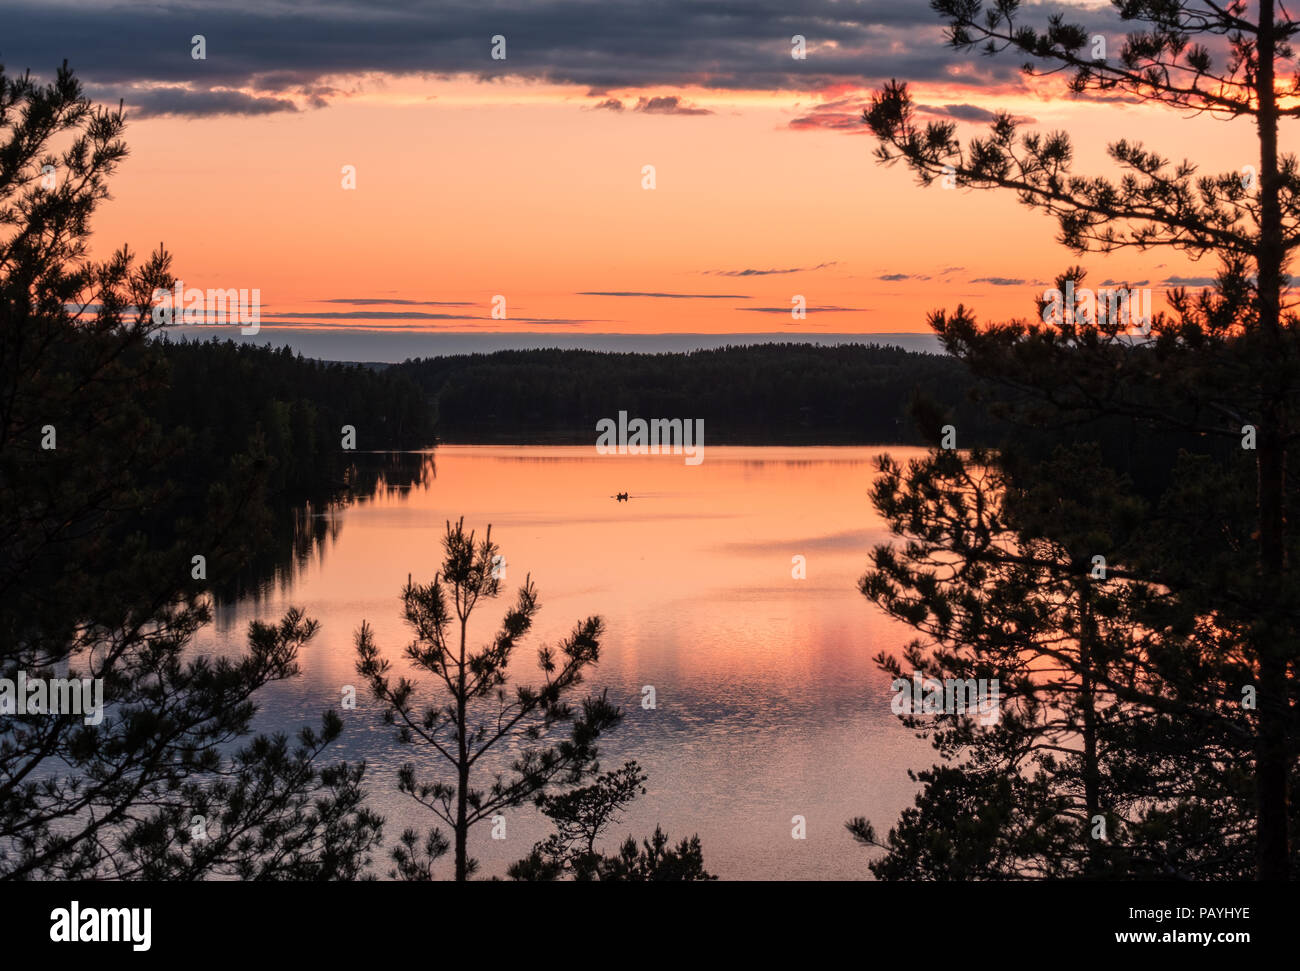 Sunset landscape with peaceful lake and row boat at summer night in Finland. Stock Photo